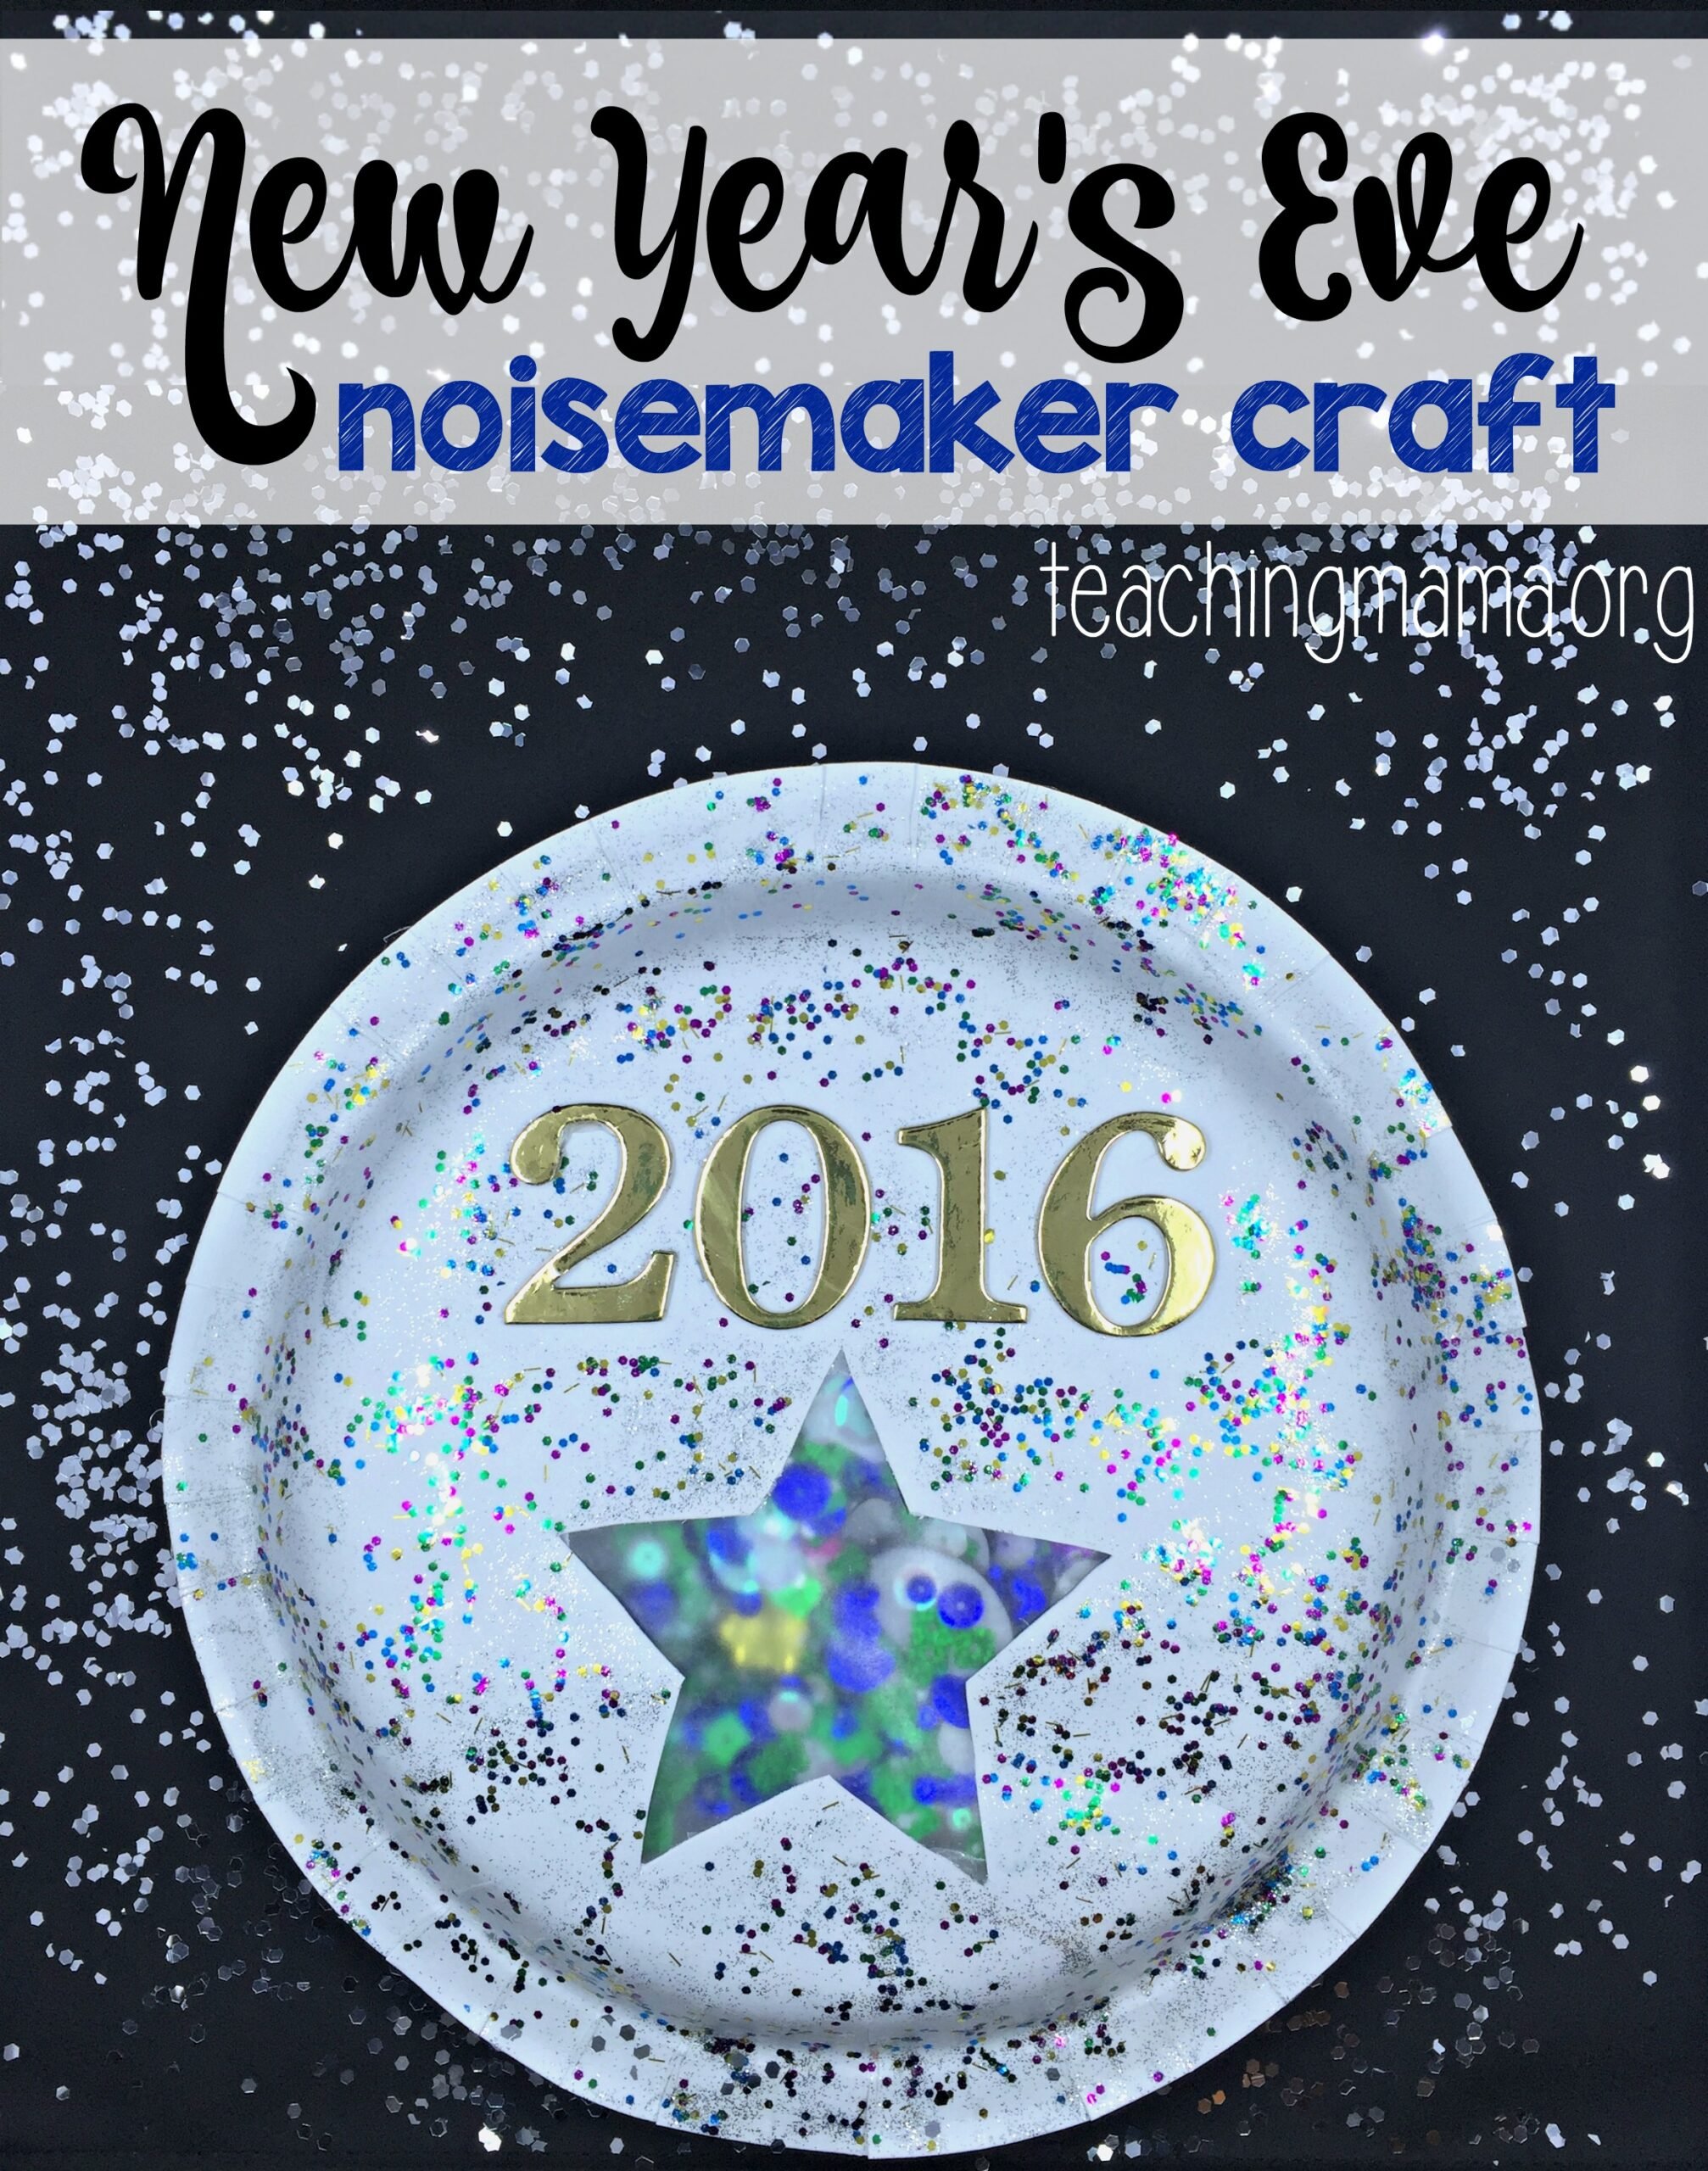 New Year’s Eve Noisemaker Craft